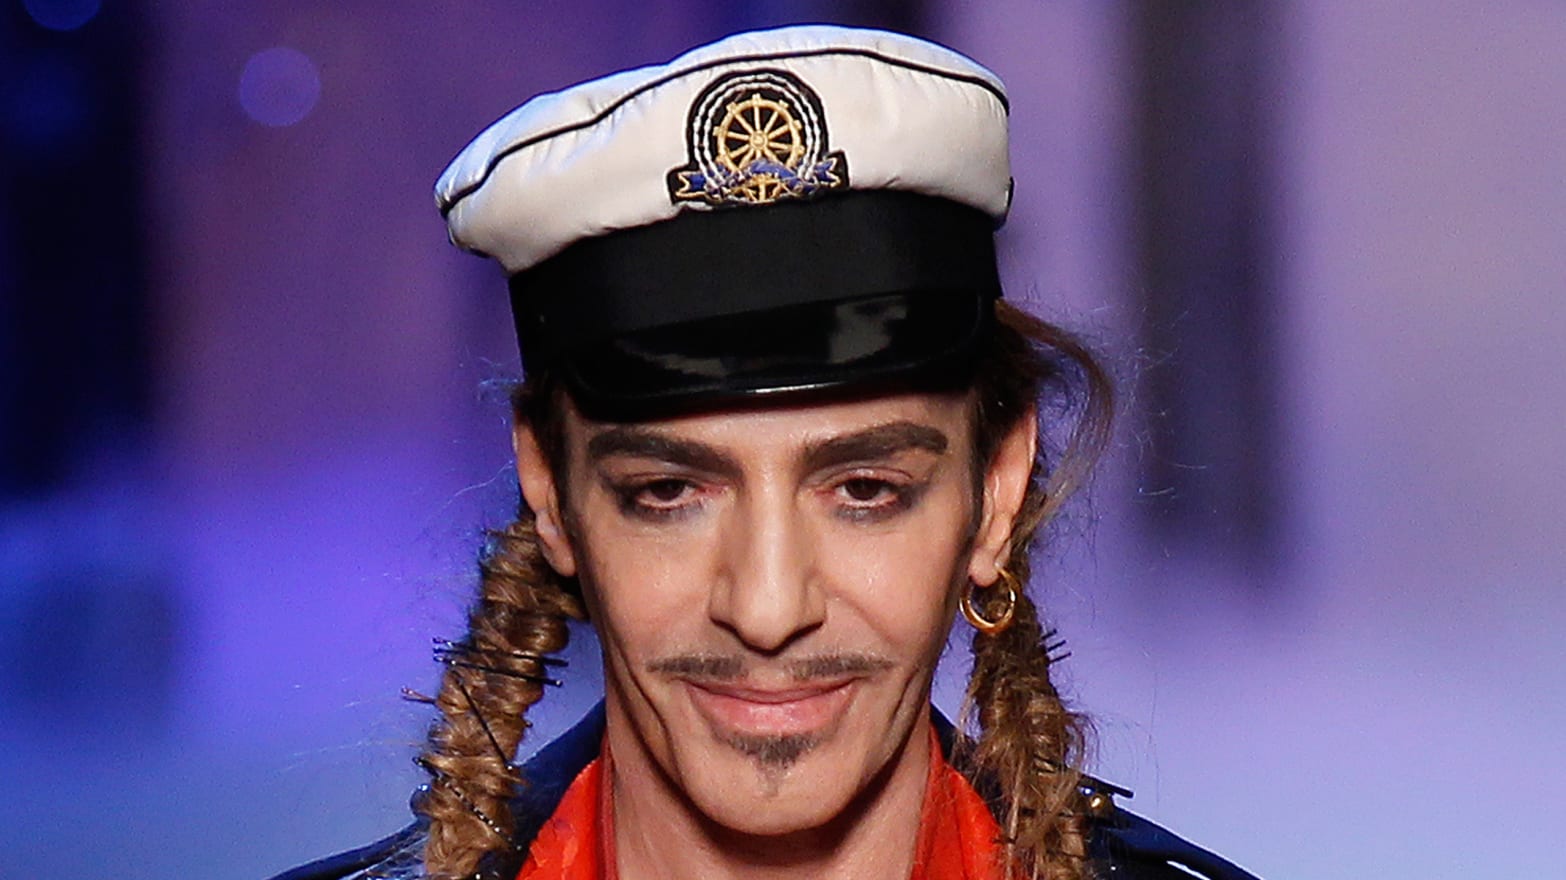 10 of the best John Galliano beauty looks of all time